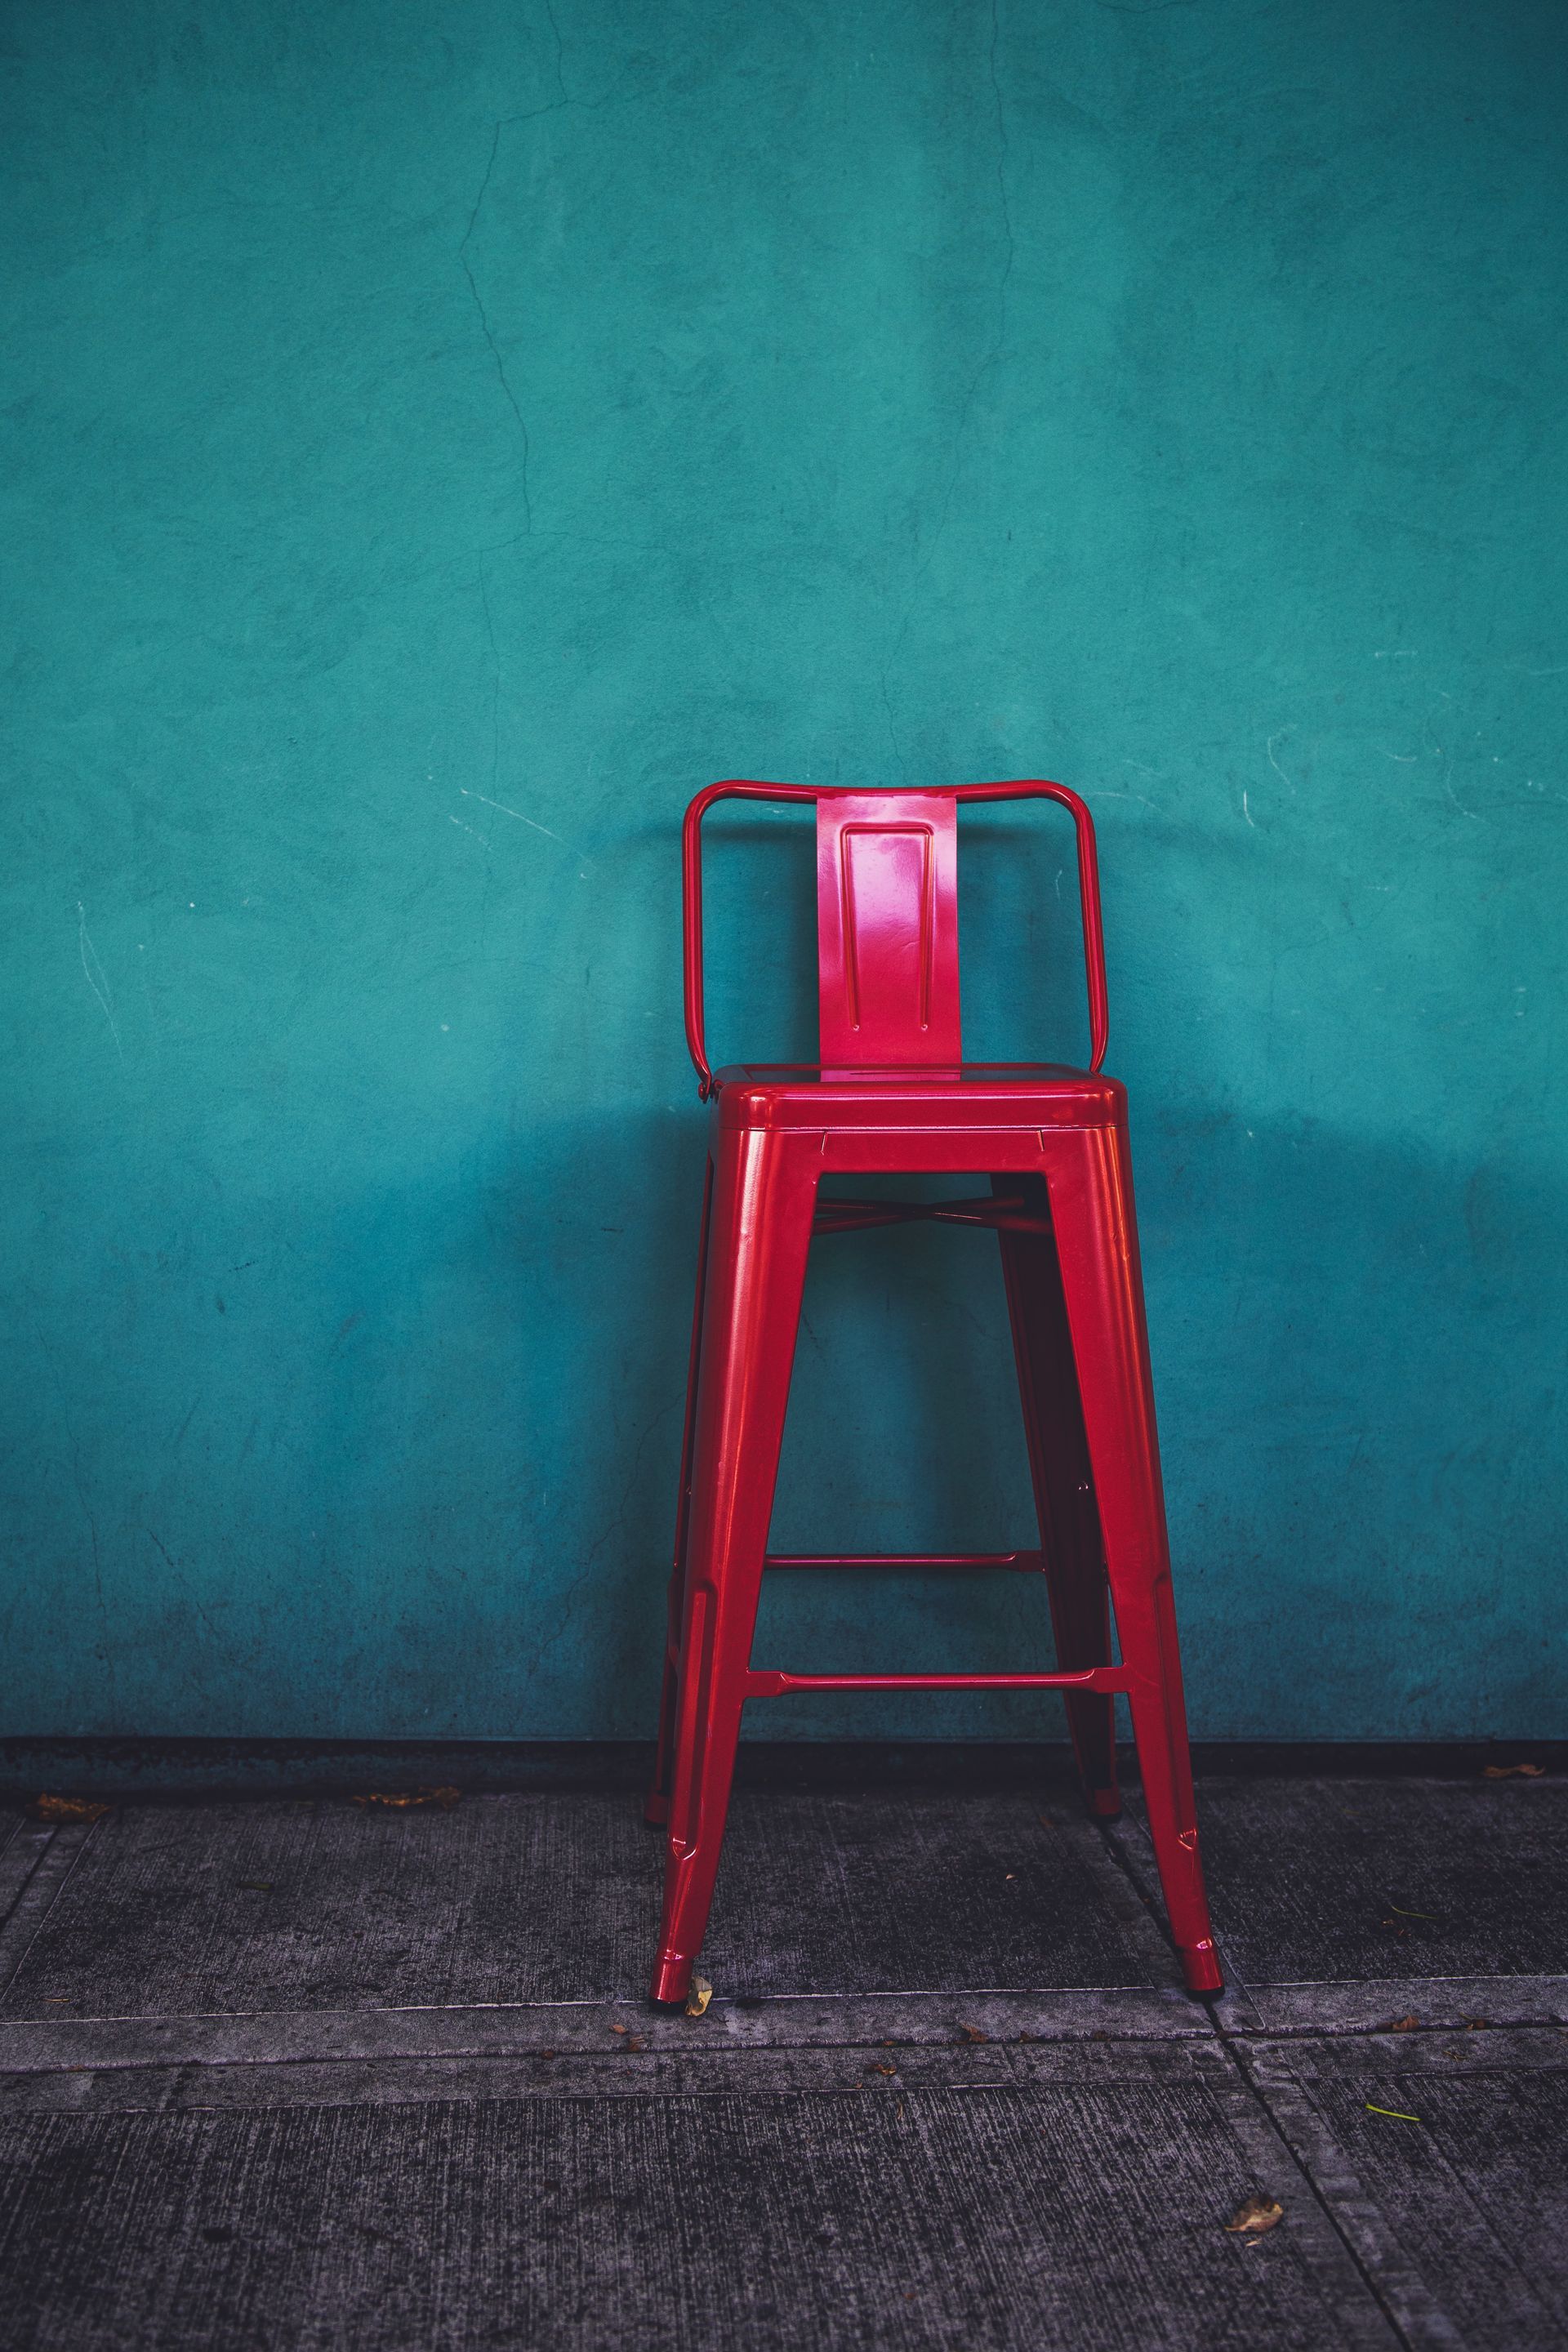 Pink Barstool against Teal Wall